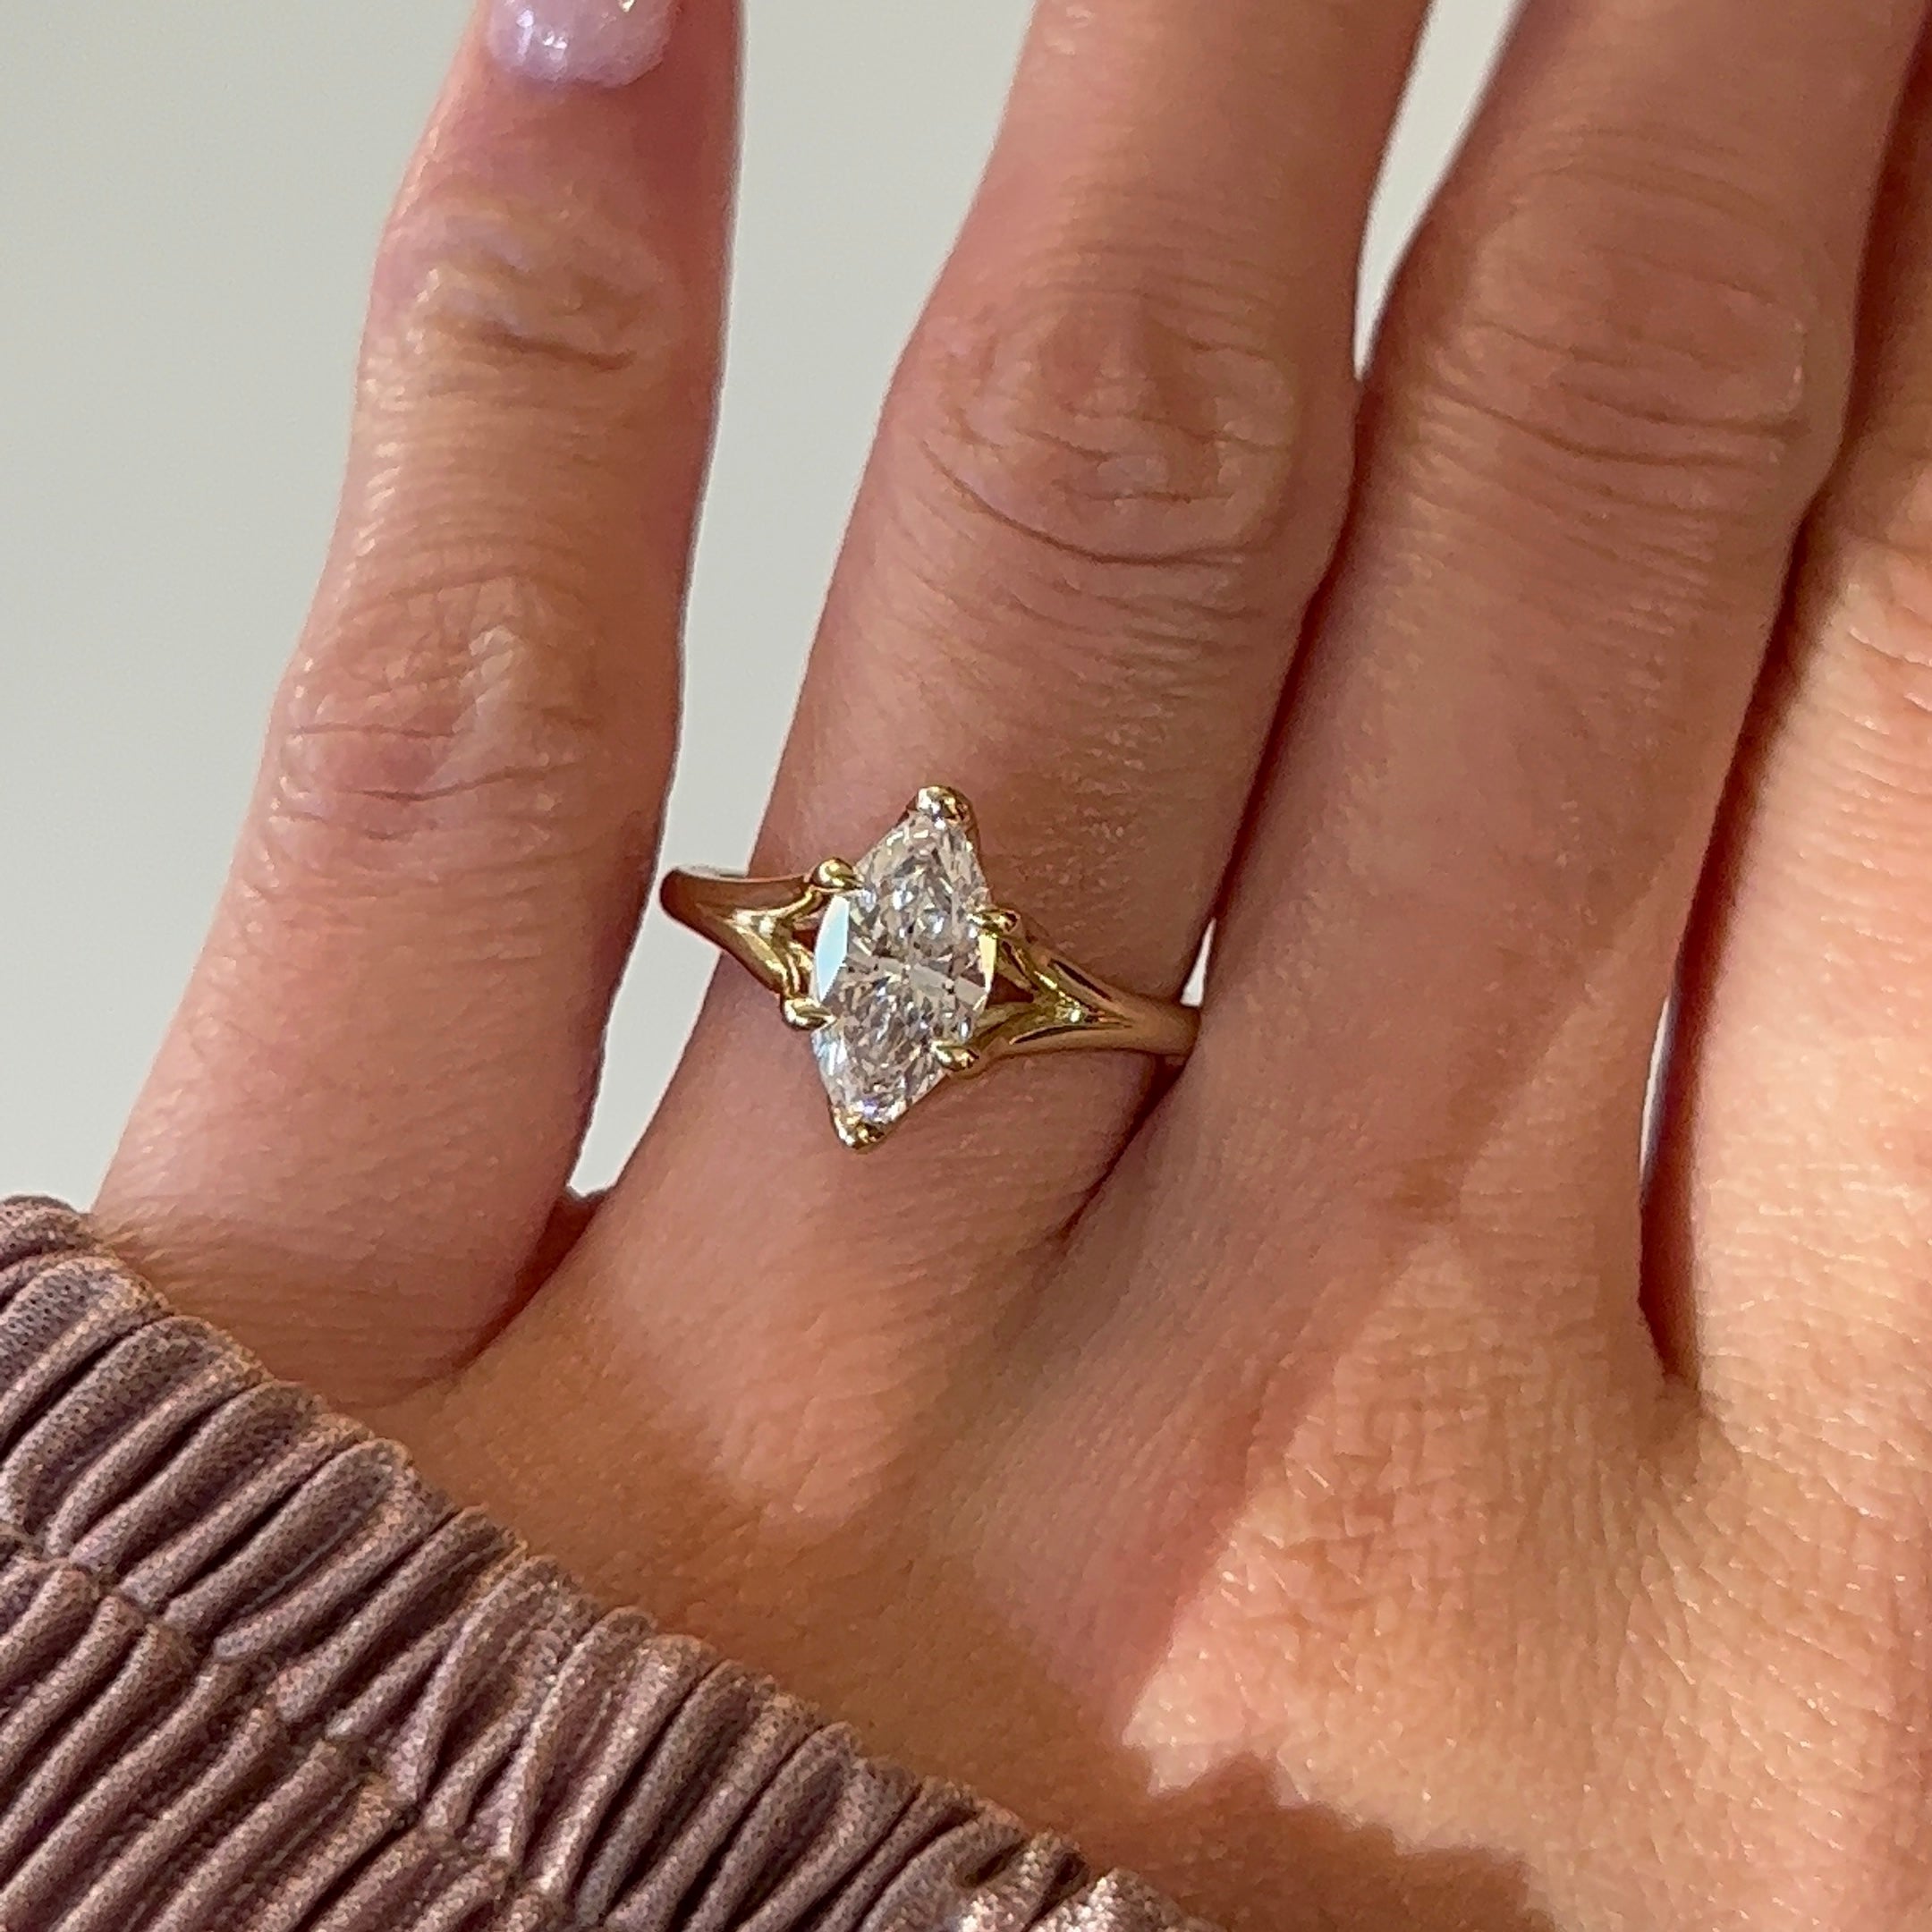 14k yellow gold marquise diamond engagement ring on a hand